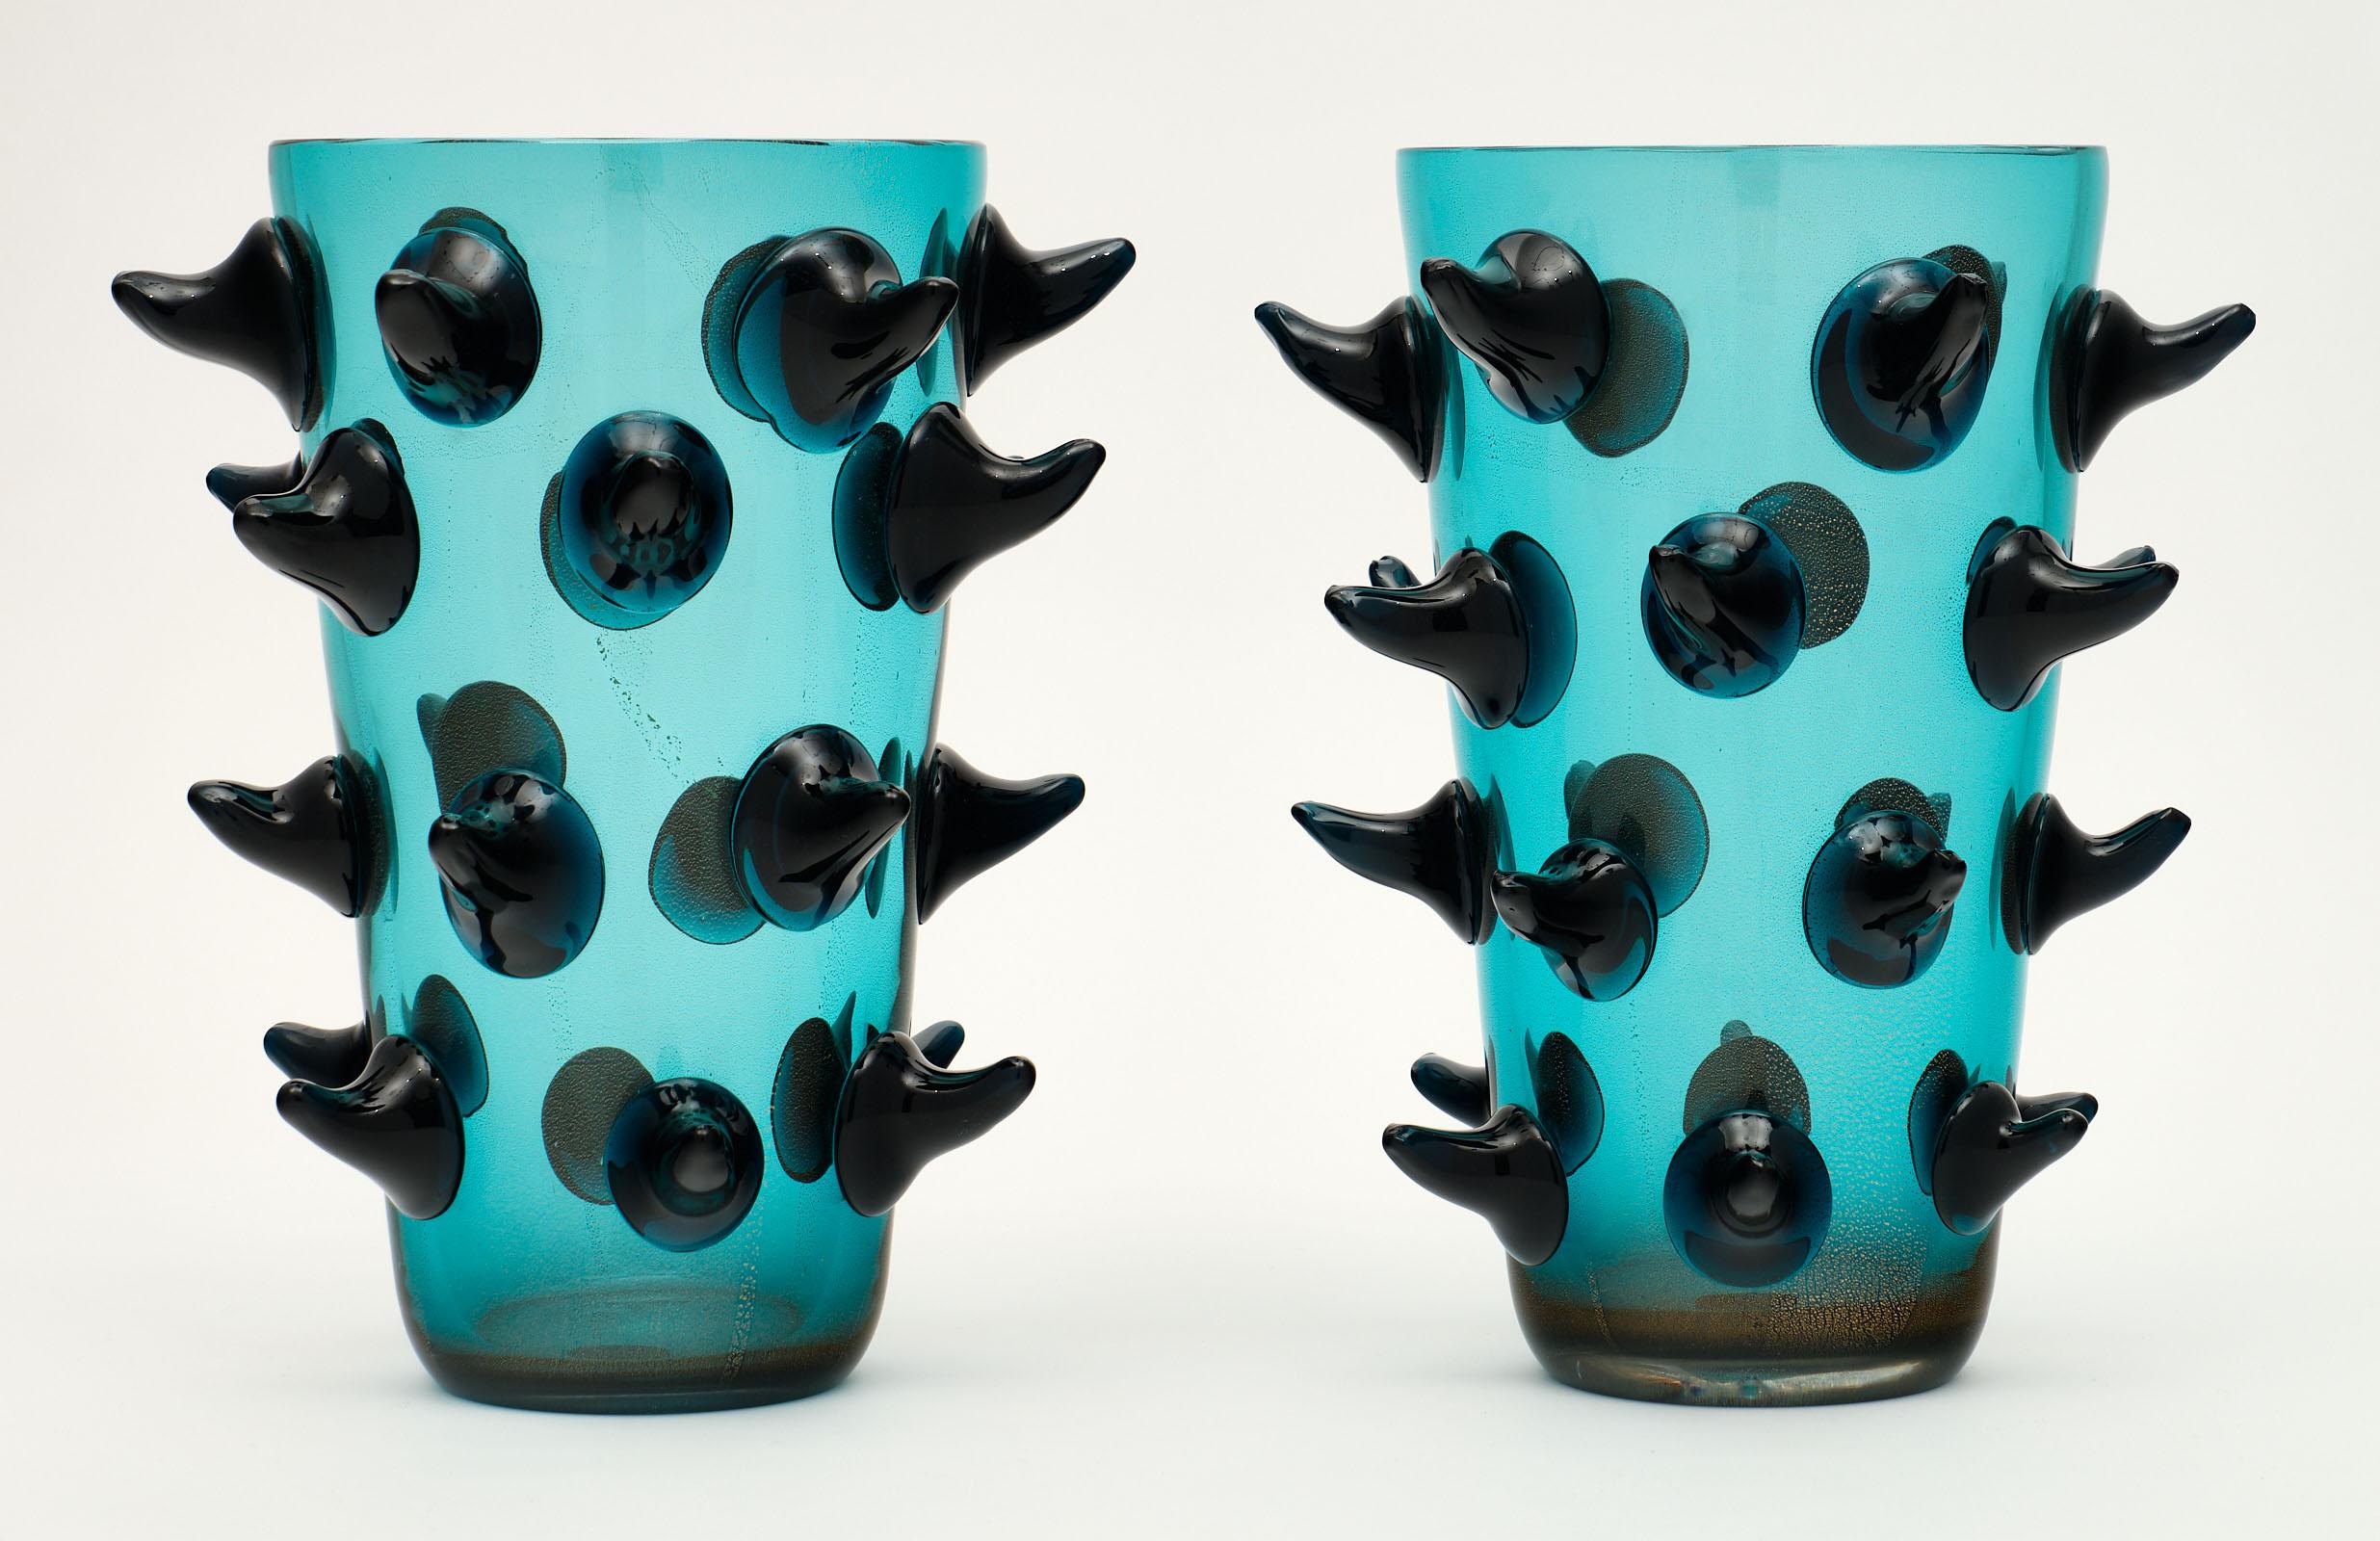 Pair of aqua Murano glass vases by Costantini featuring multiple spikes and an avventurina gold technique to add depth to the glass. We love the hand blown quality and blue-green color of this pair. They are signed.